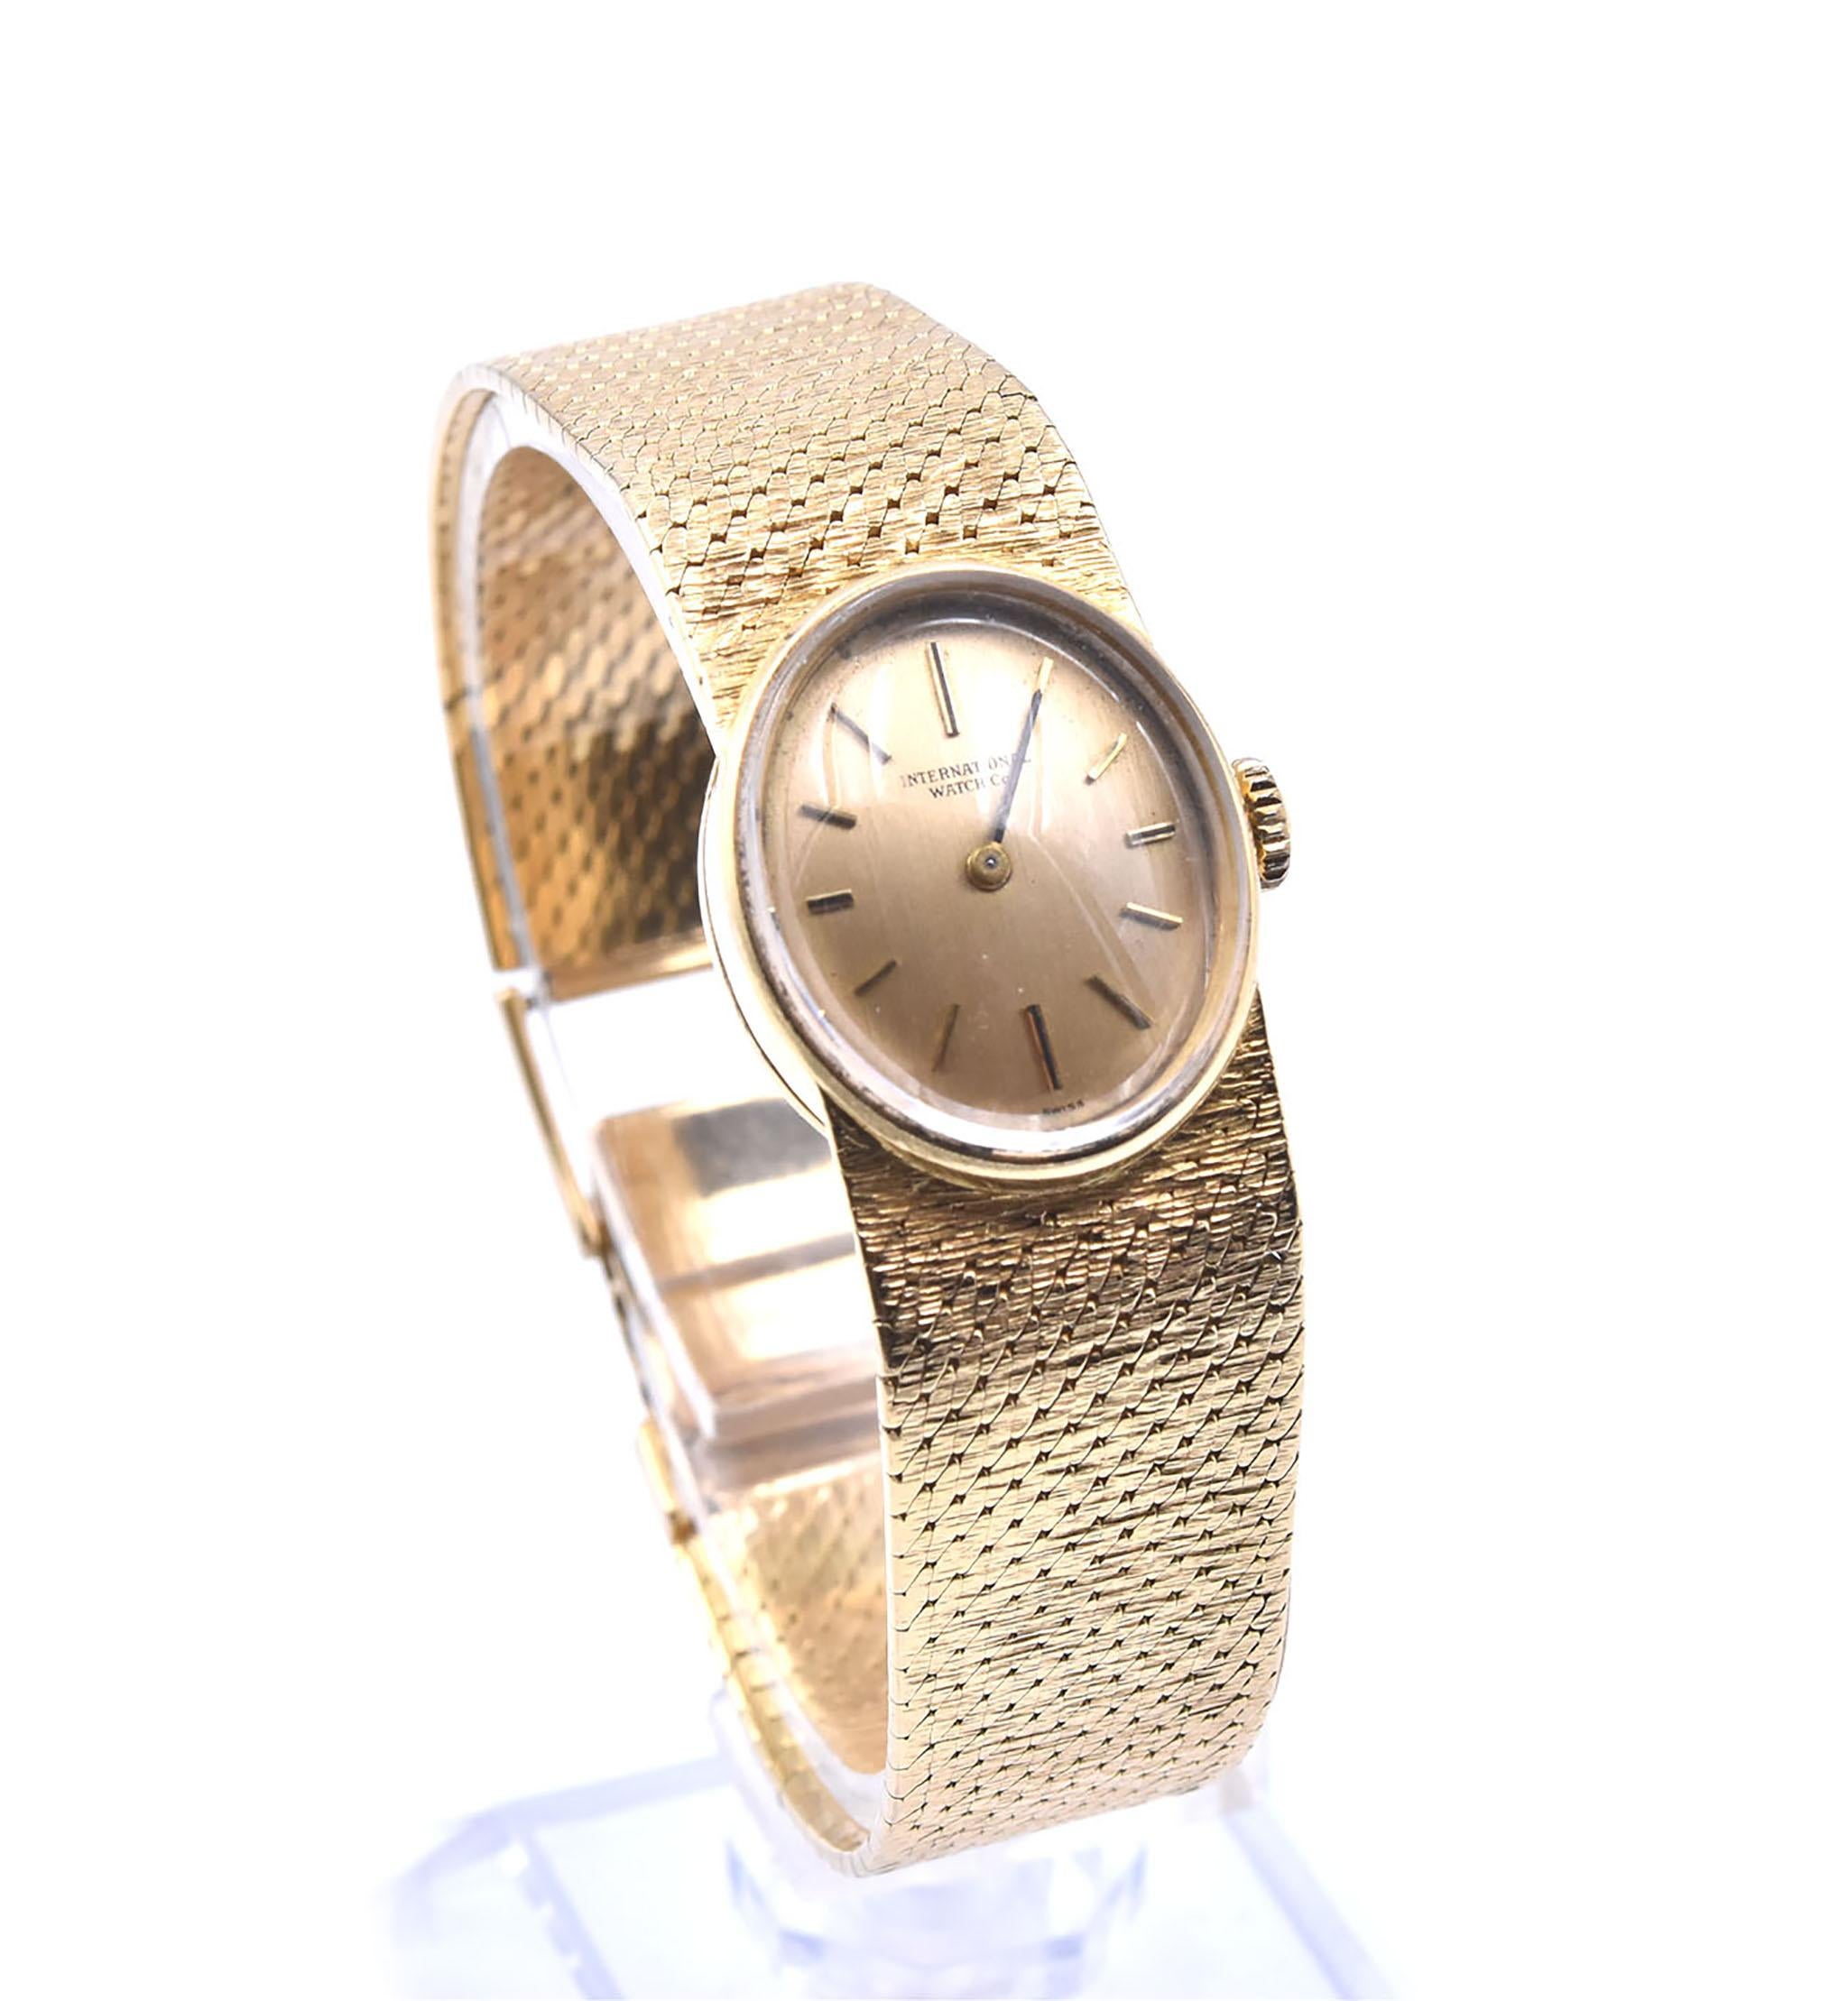 Movement: mechanical 
Function: hours, minutes
Case: 20.96mm by 17.62mm oval 18k yellow gold case, plastic crystal, pull/push crown
Band: 18k yellow gold mesh bracelet, fold down clasp, watch will fit a 6” wrist
Dial: gold dial with gold hour stick